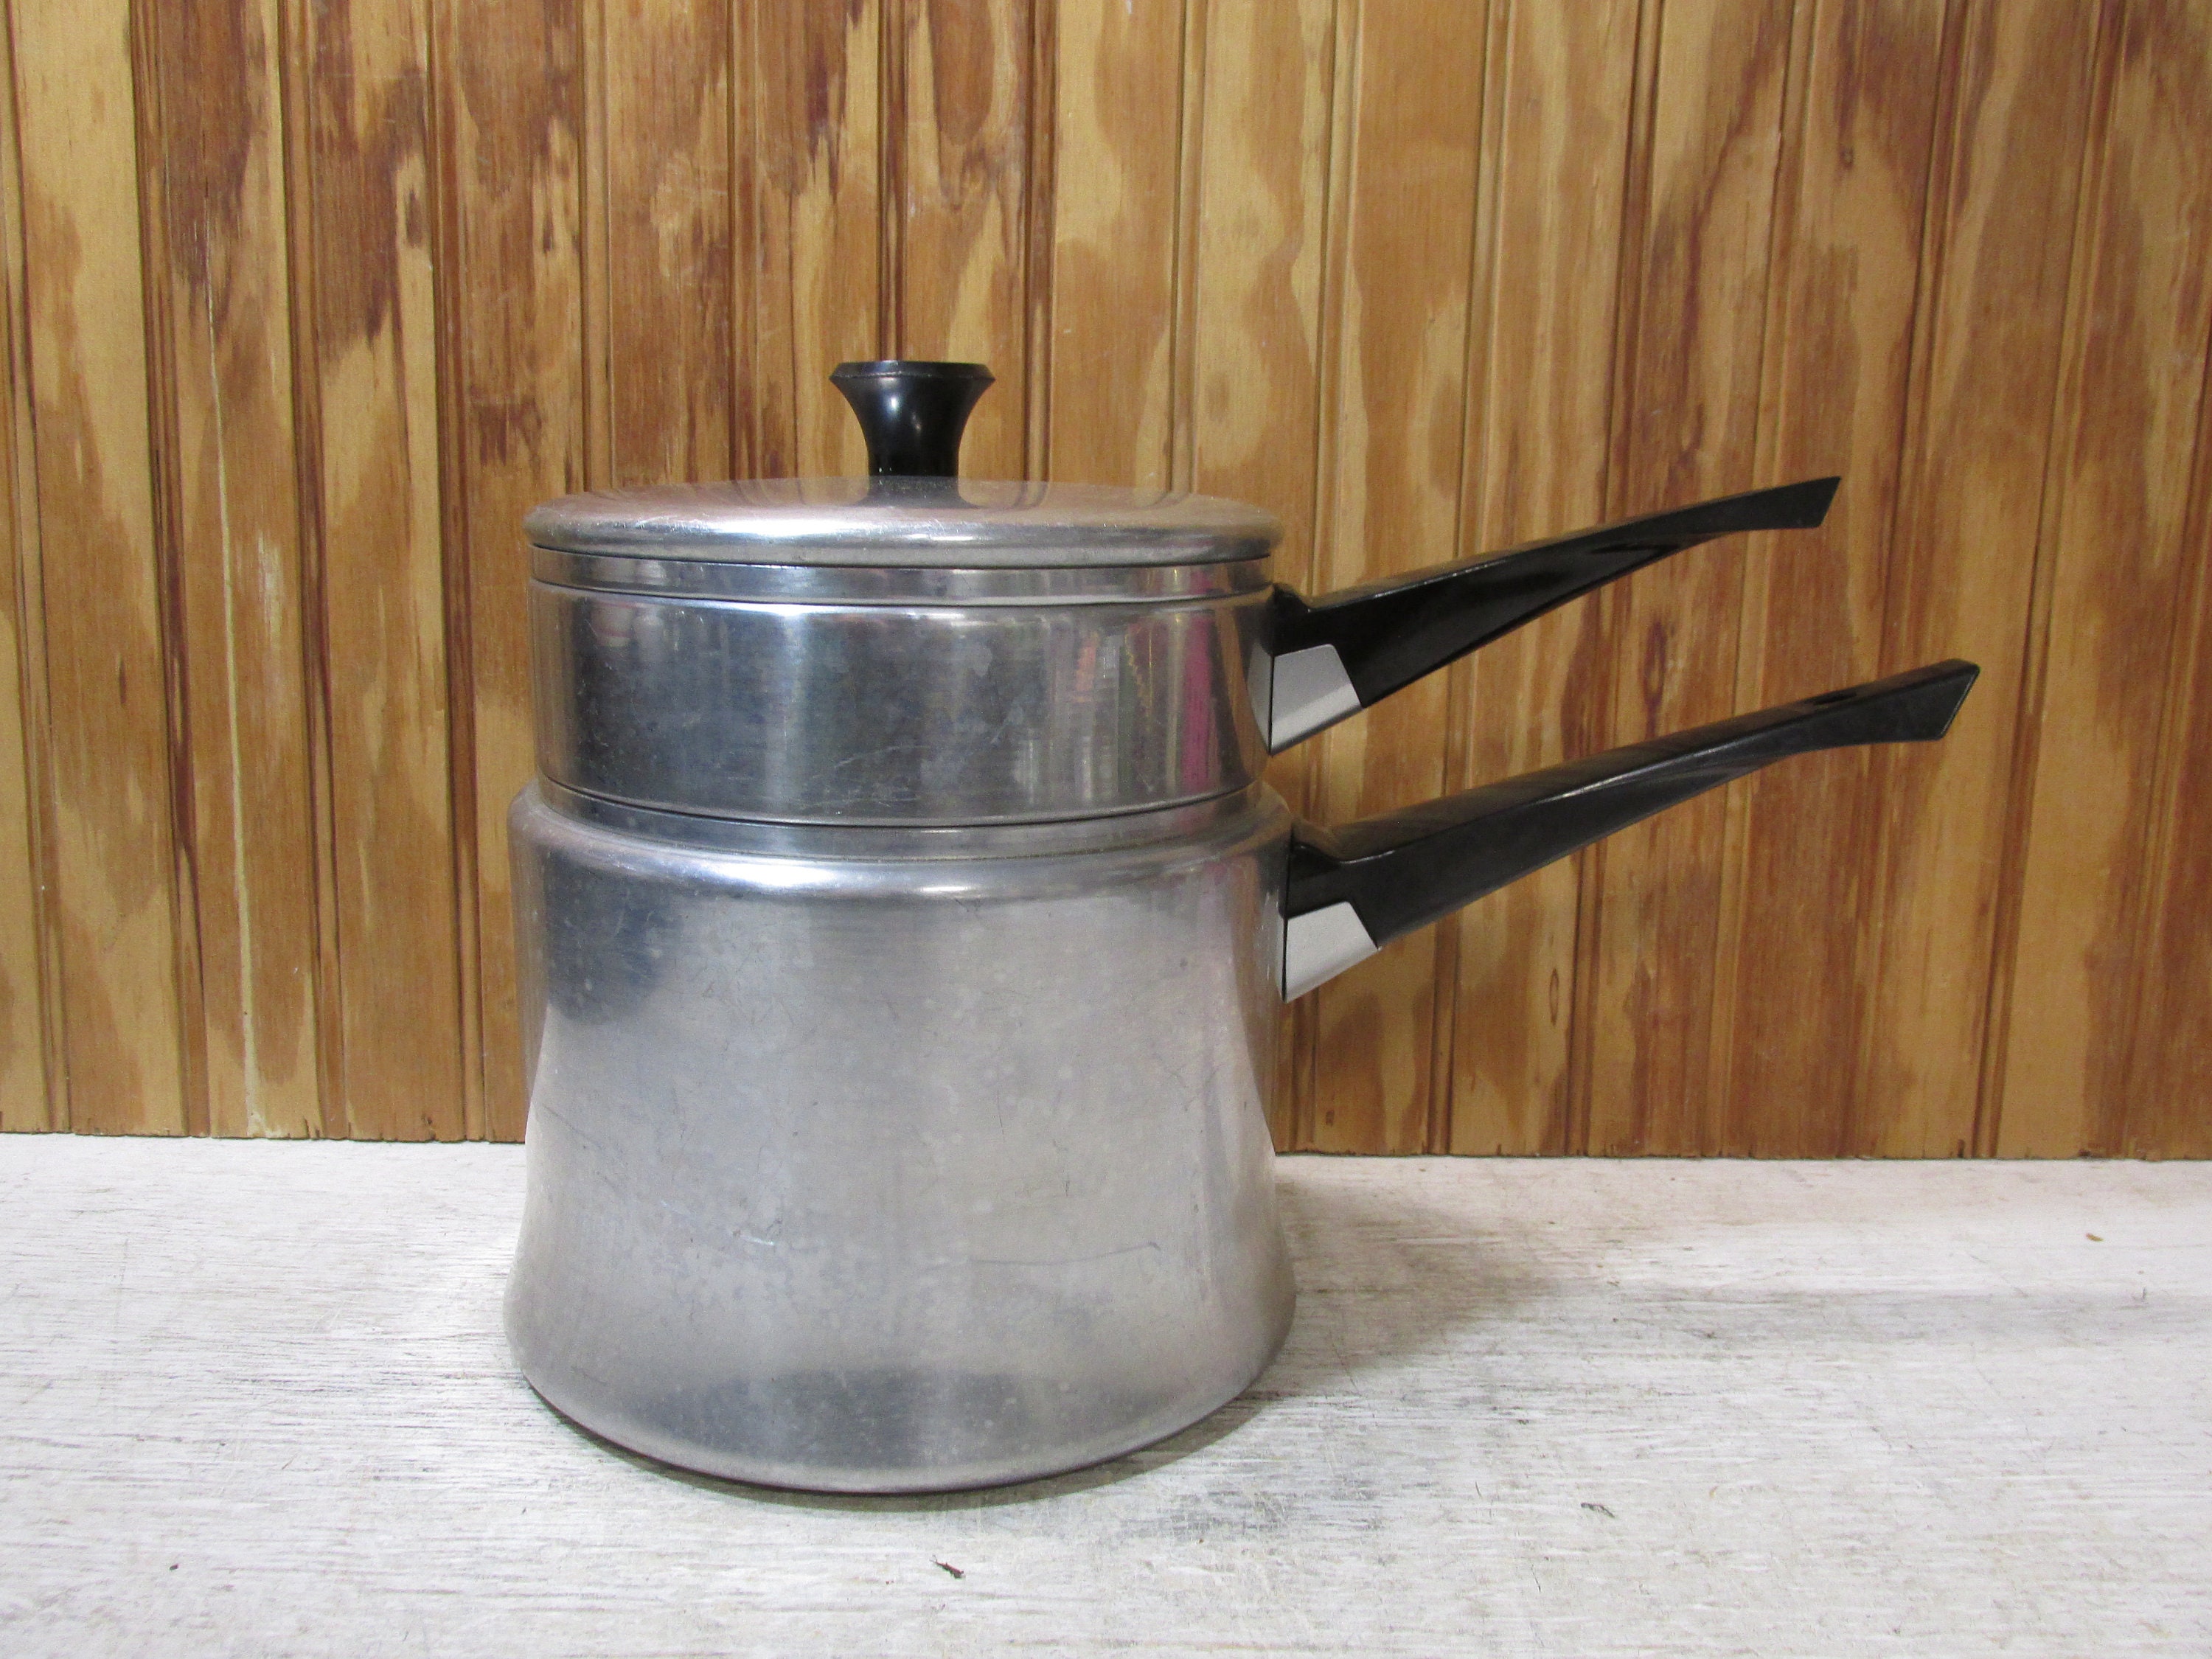 Vintage COMET Double Boiler Pot with Lid THE POPULAR ALUMINUM Made in USA